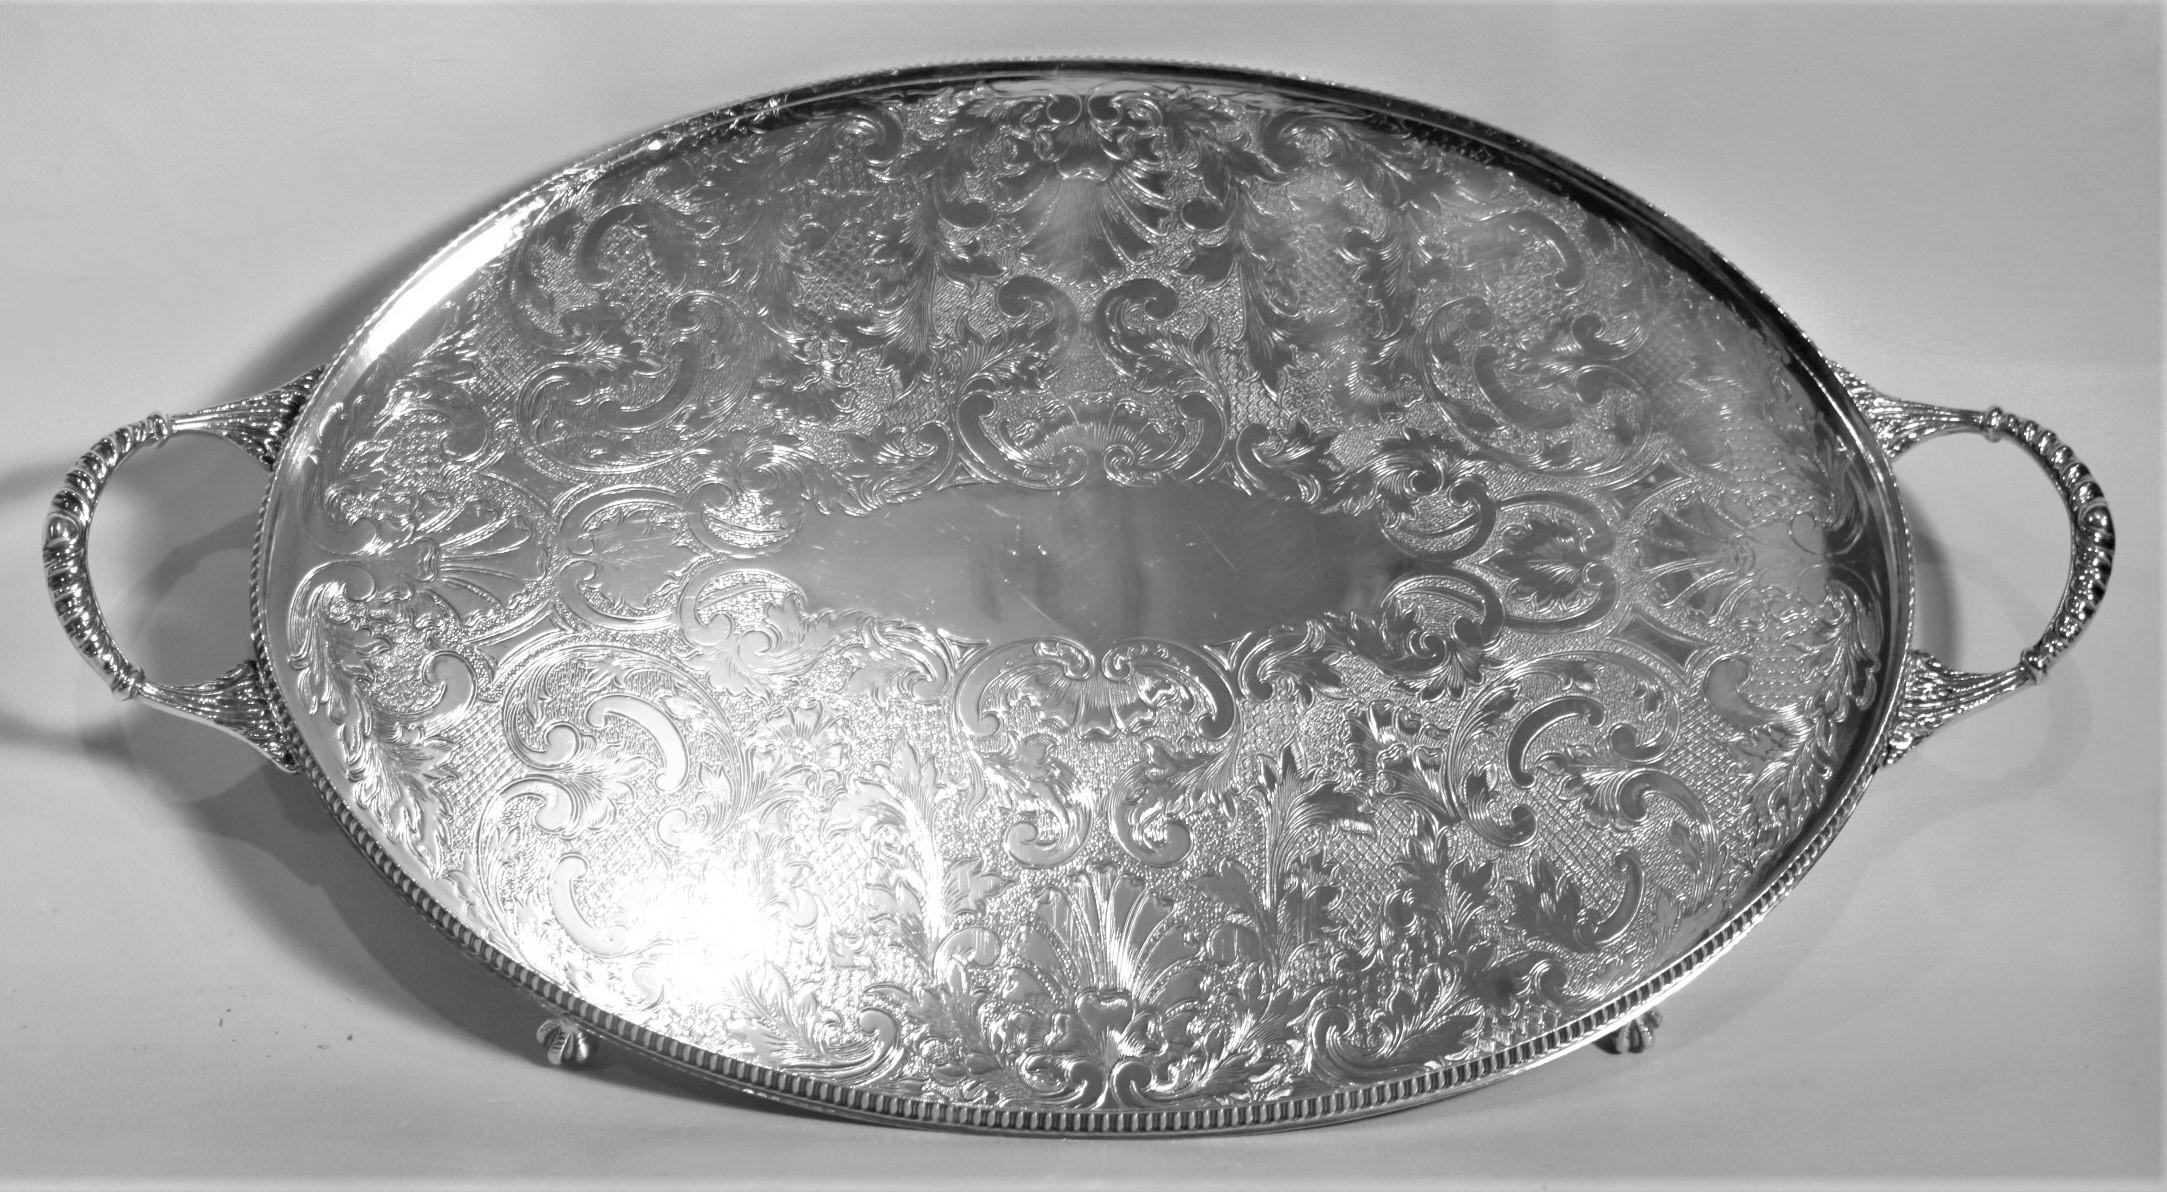 Metal Antique English Silver Plated Footed Gallery Serving Tray with Ornate Engraving For Sale